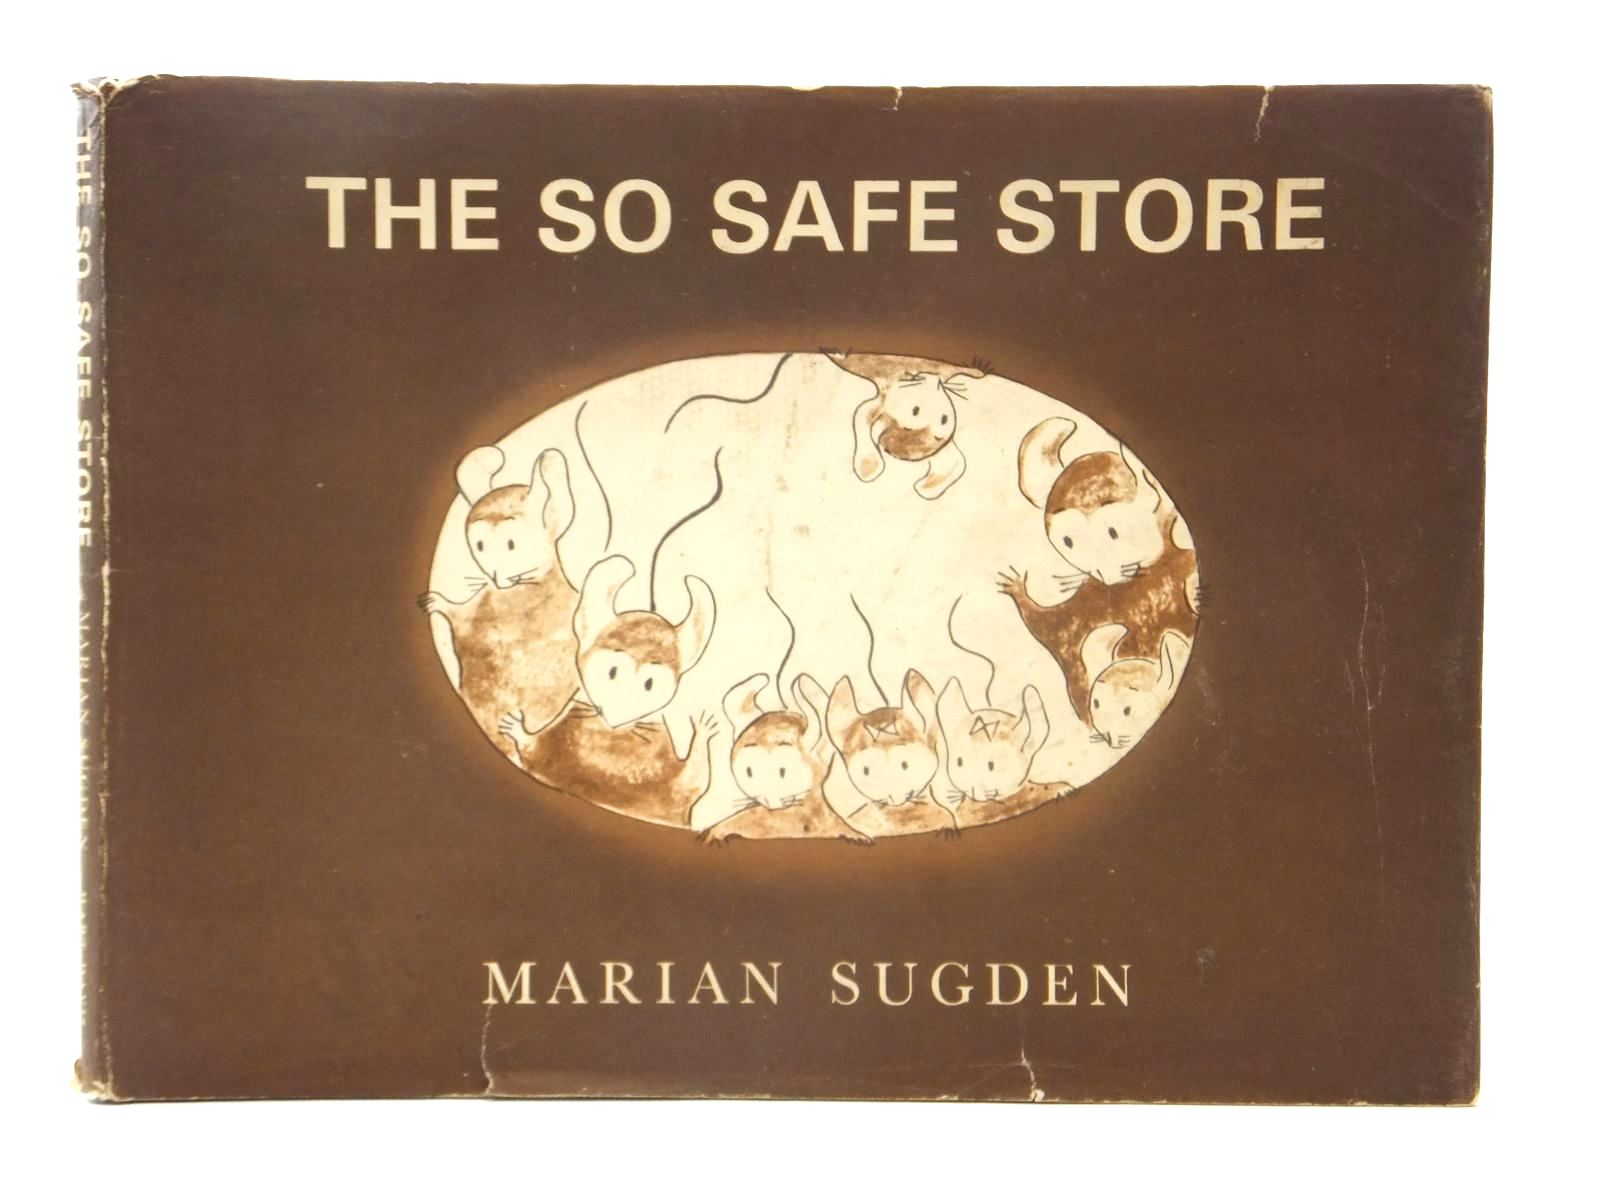 SUGDEN, MARIAN ILLUSTRATED BY SUGDEN, MARIAN - The So Safe Store